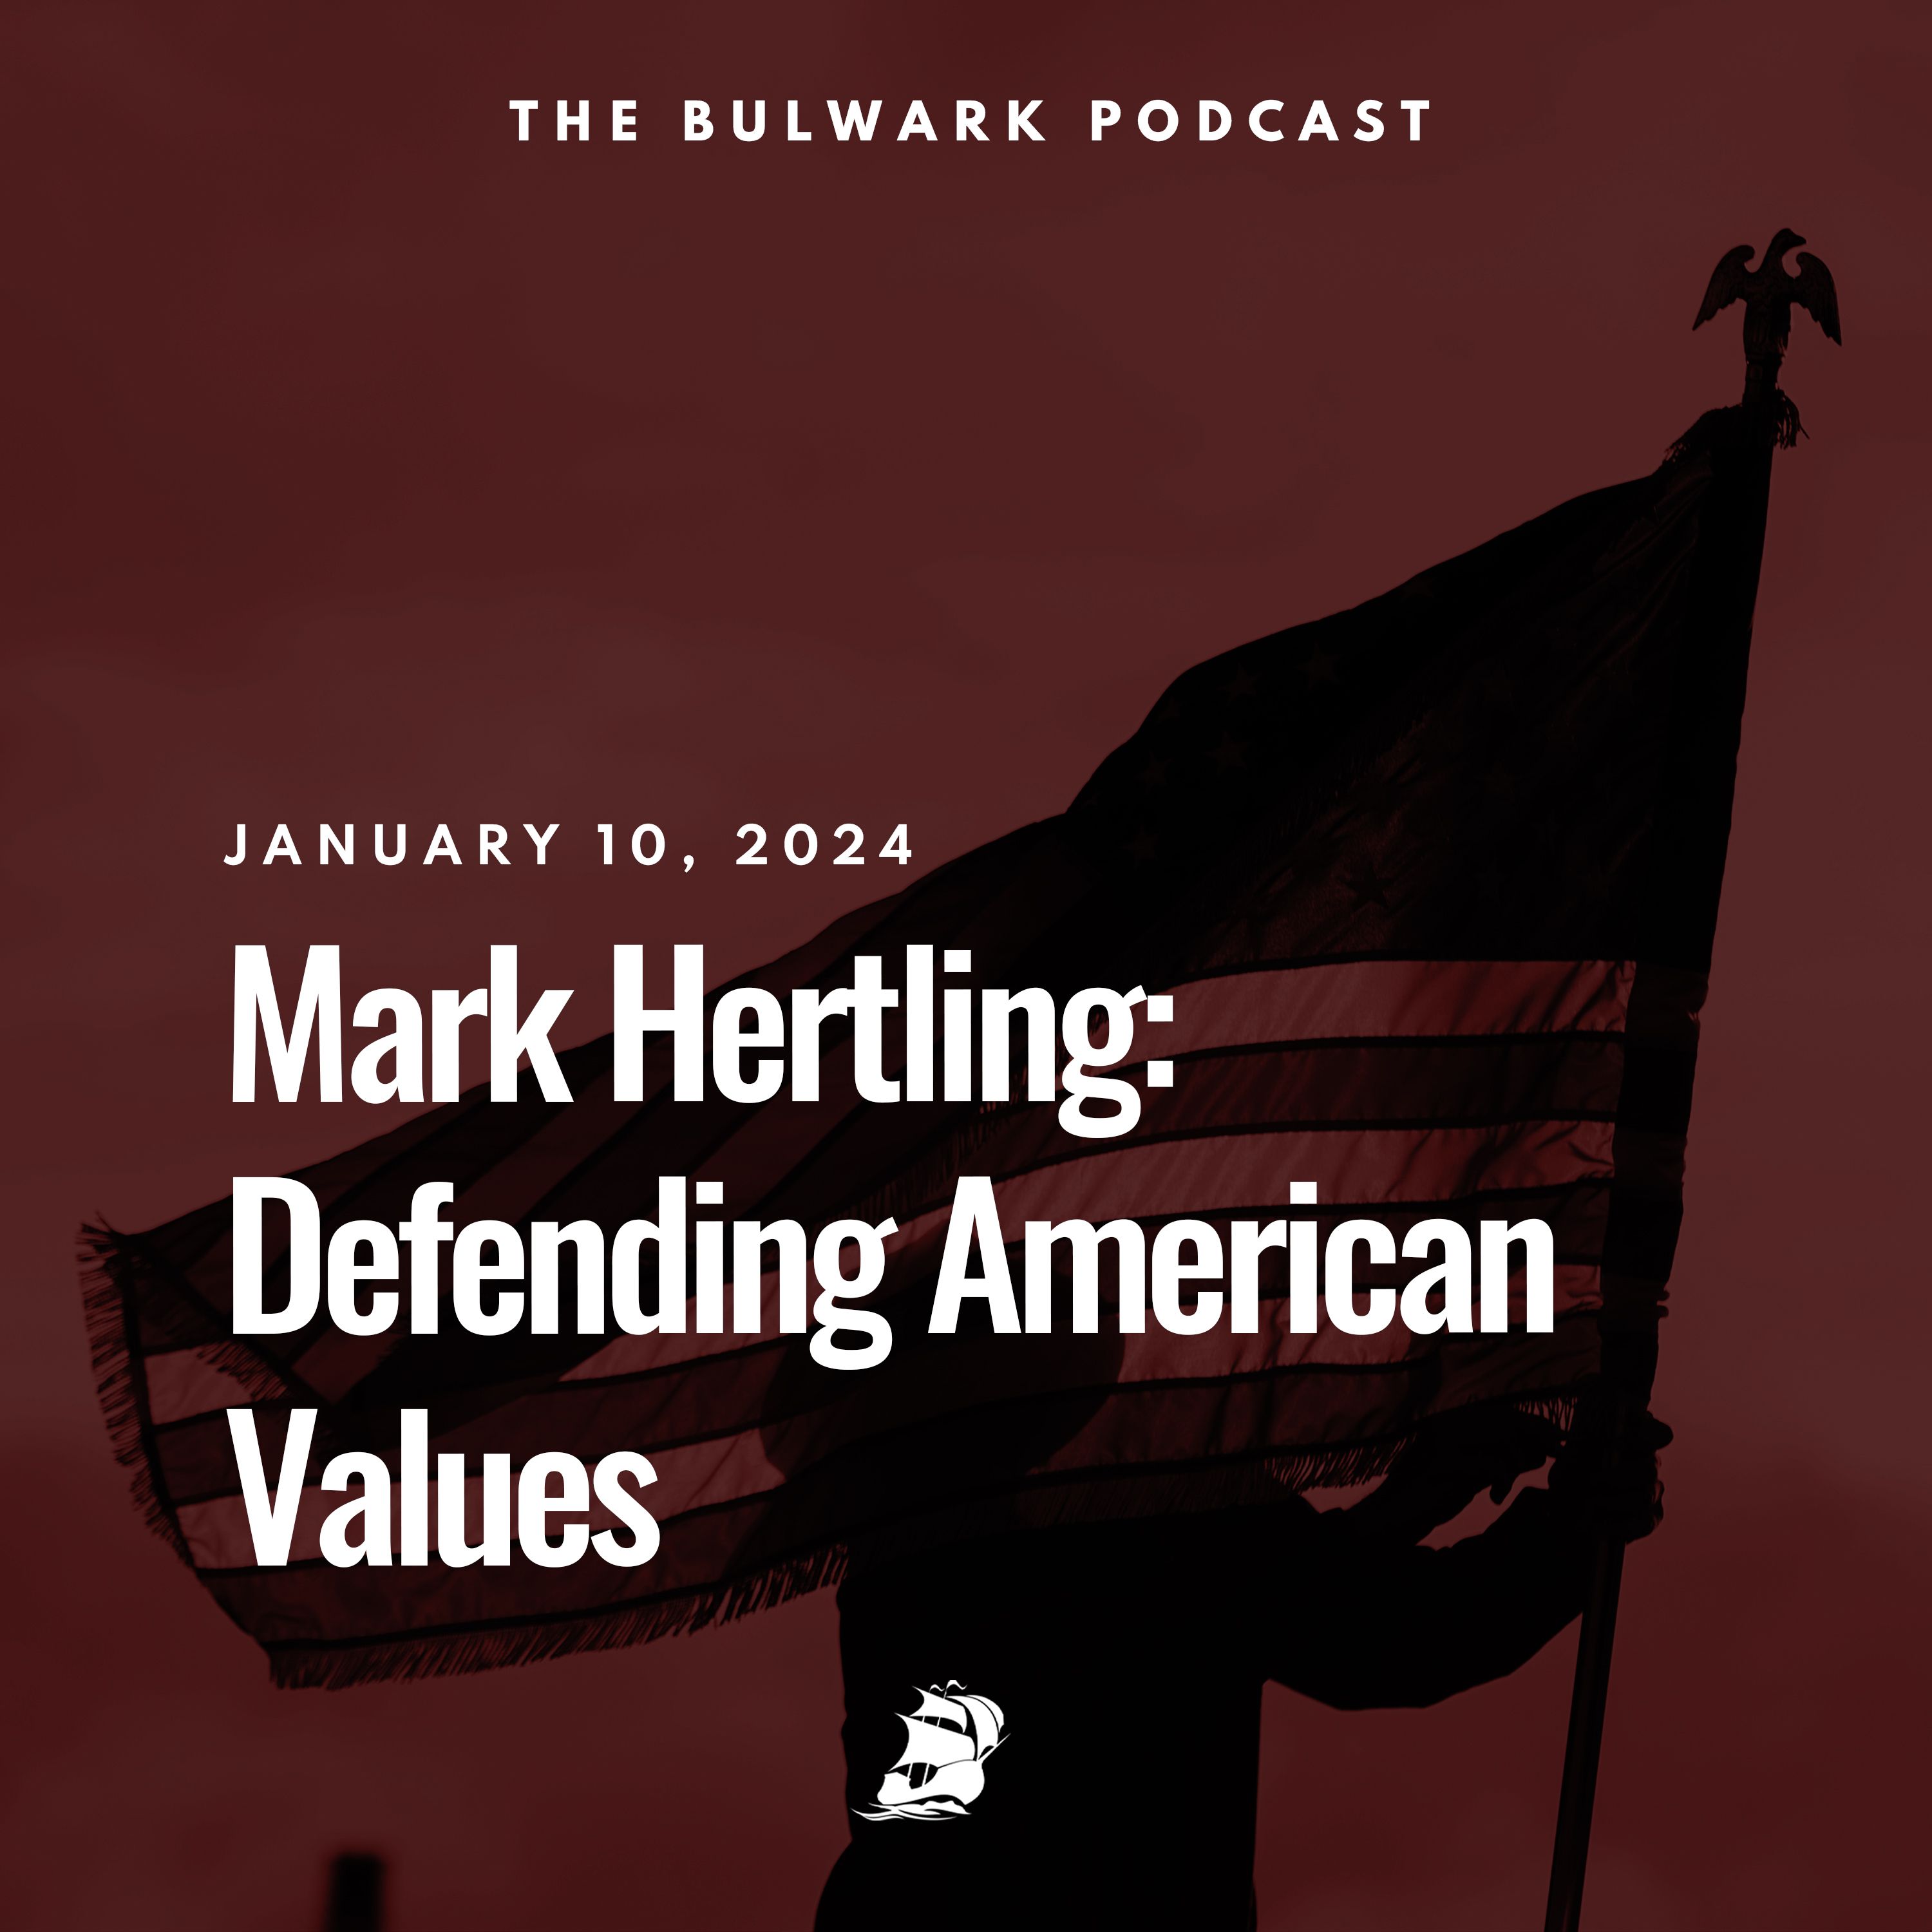 Mark Hertling: Defending American Values by The Bulwark Podcast